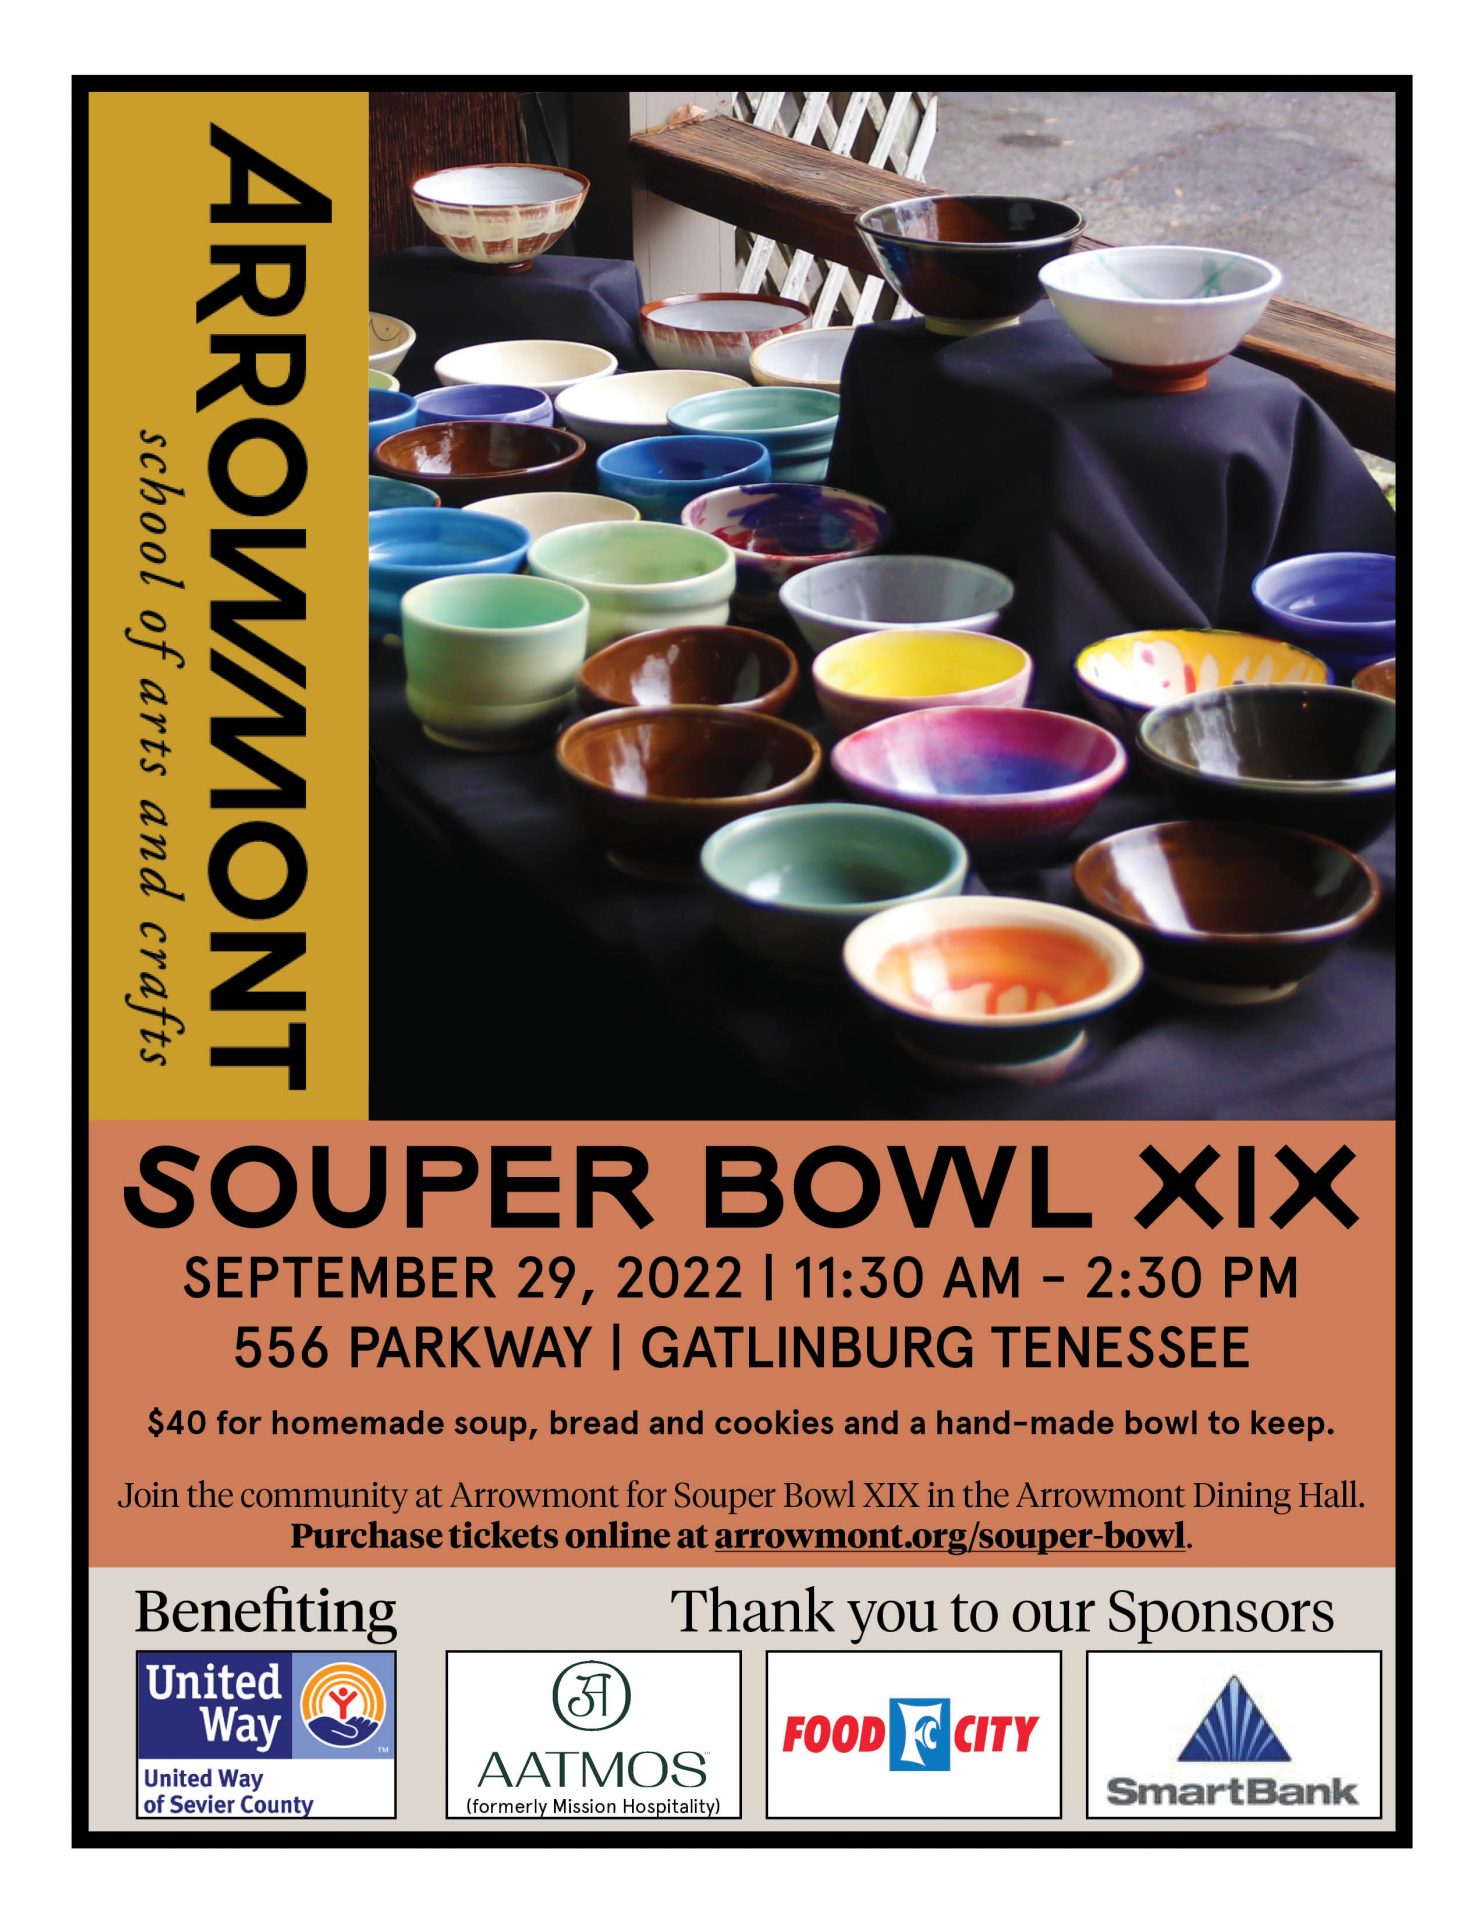 Poster for Souper Bowl XIX - September 29, 2022 - Arrowmont Dining Hall - 11:30 am - 2:30 pm